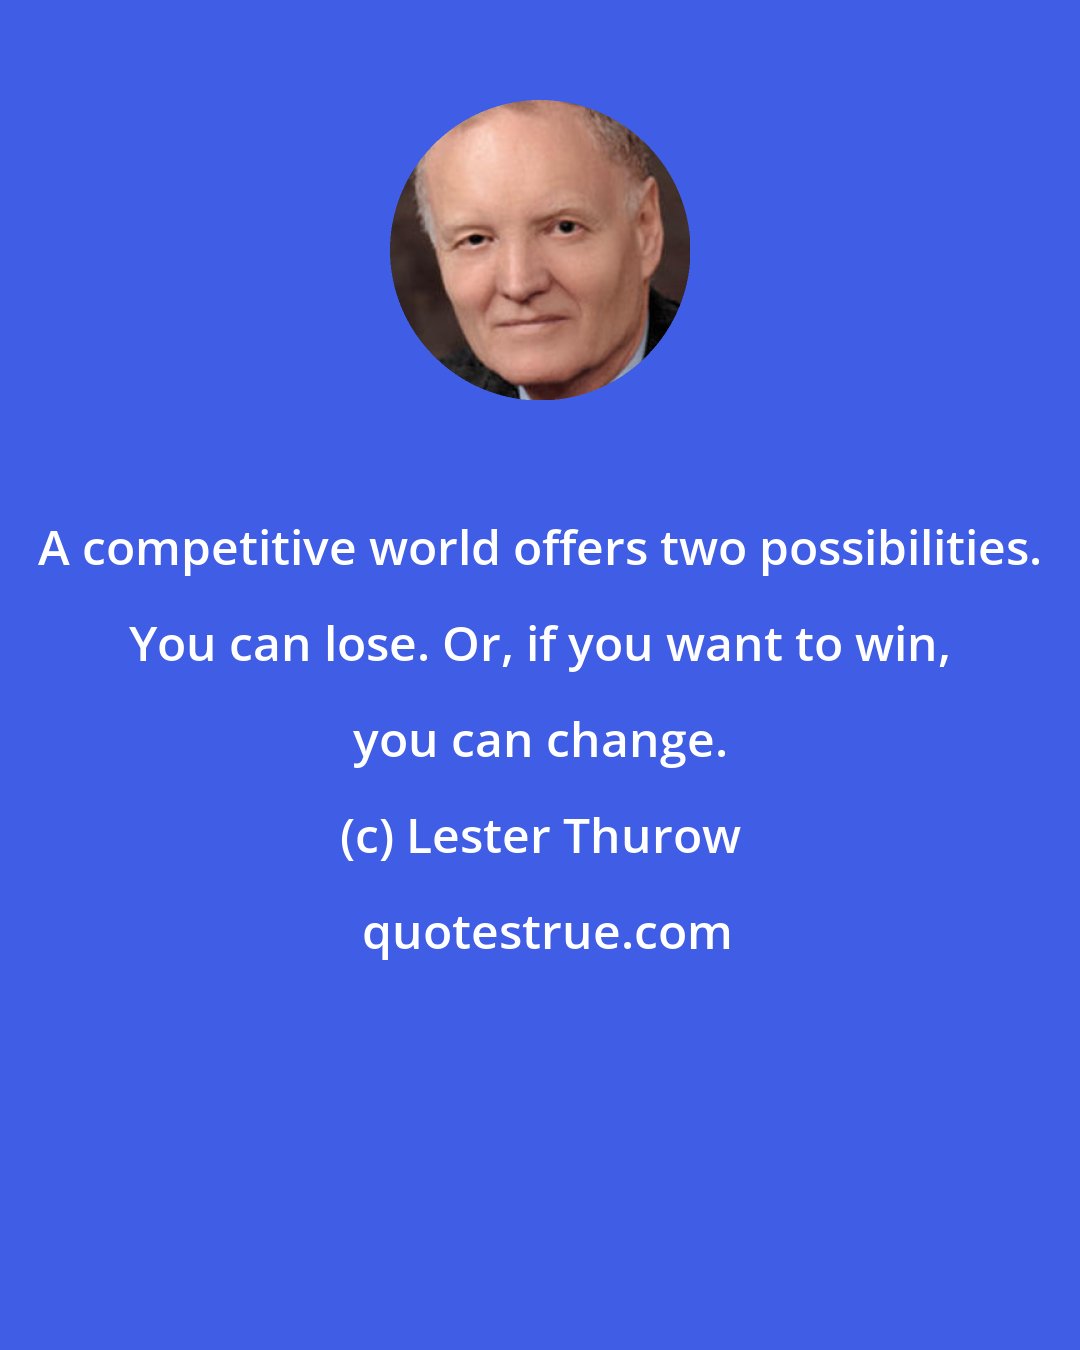 Lester Thurow: A competitive world offers two possibilities. You can lose. Or, if you want to win, you can change.